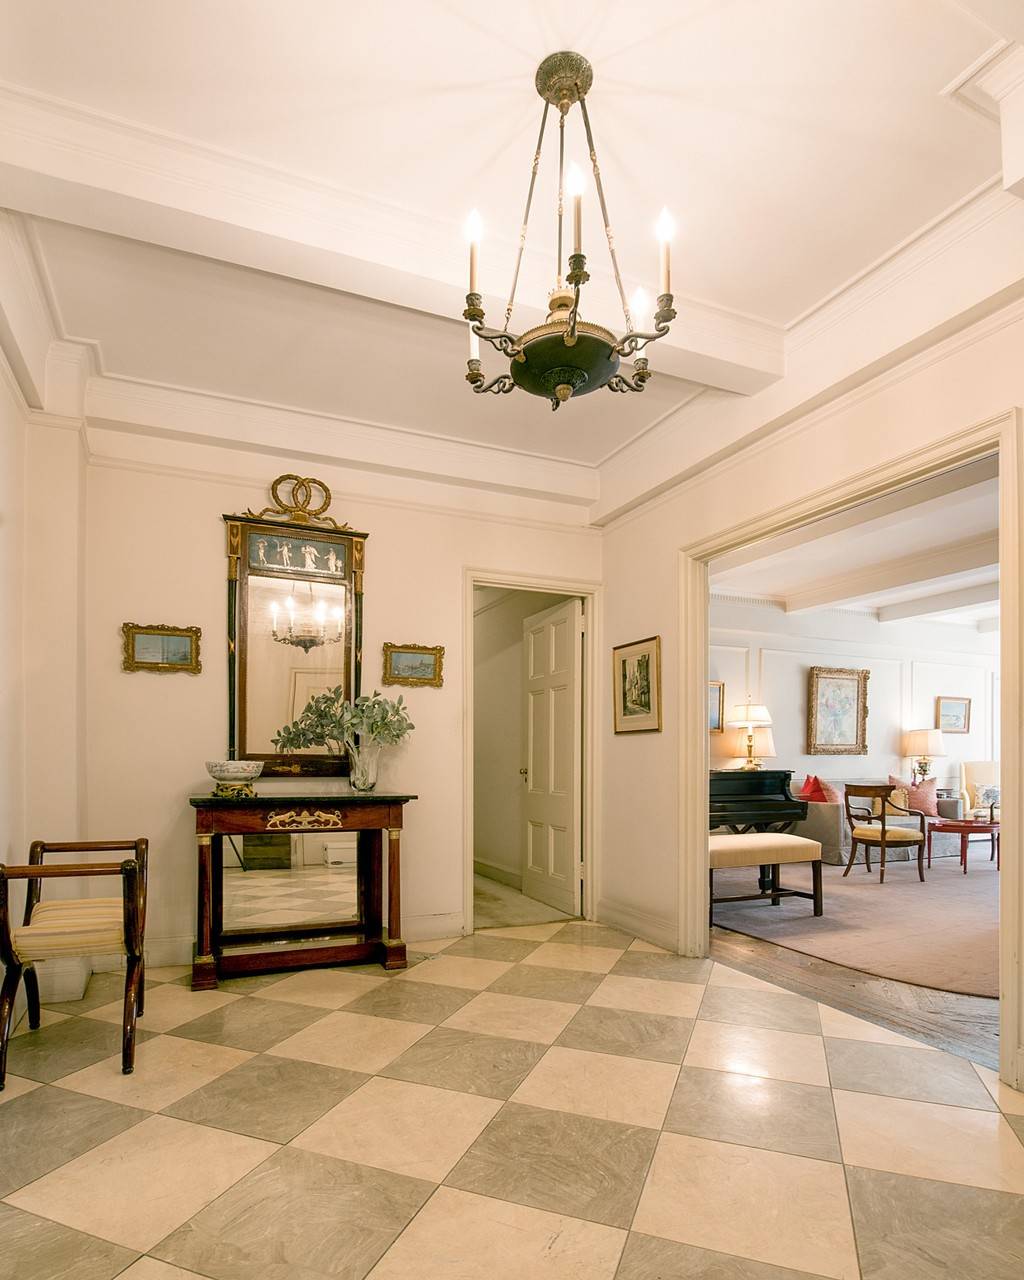 Welcome to Apt. 12B located in one of Carnegie Hill's most prestigious long established white glove pre war cooperatives built in 1929, by the renowned architect, George Pelham.